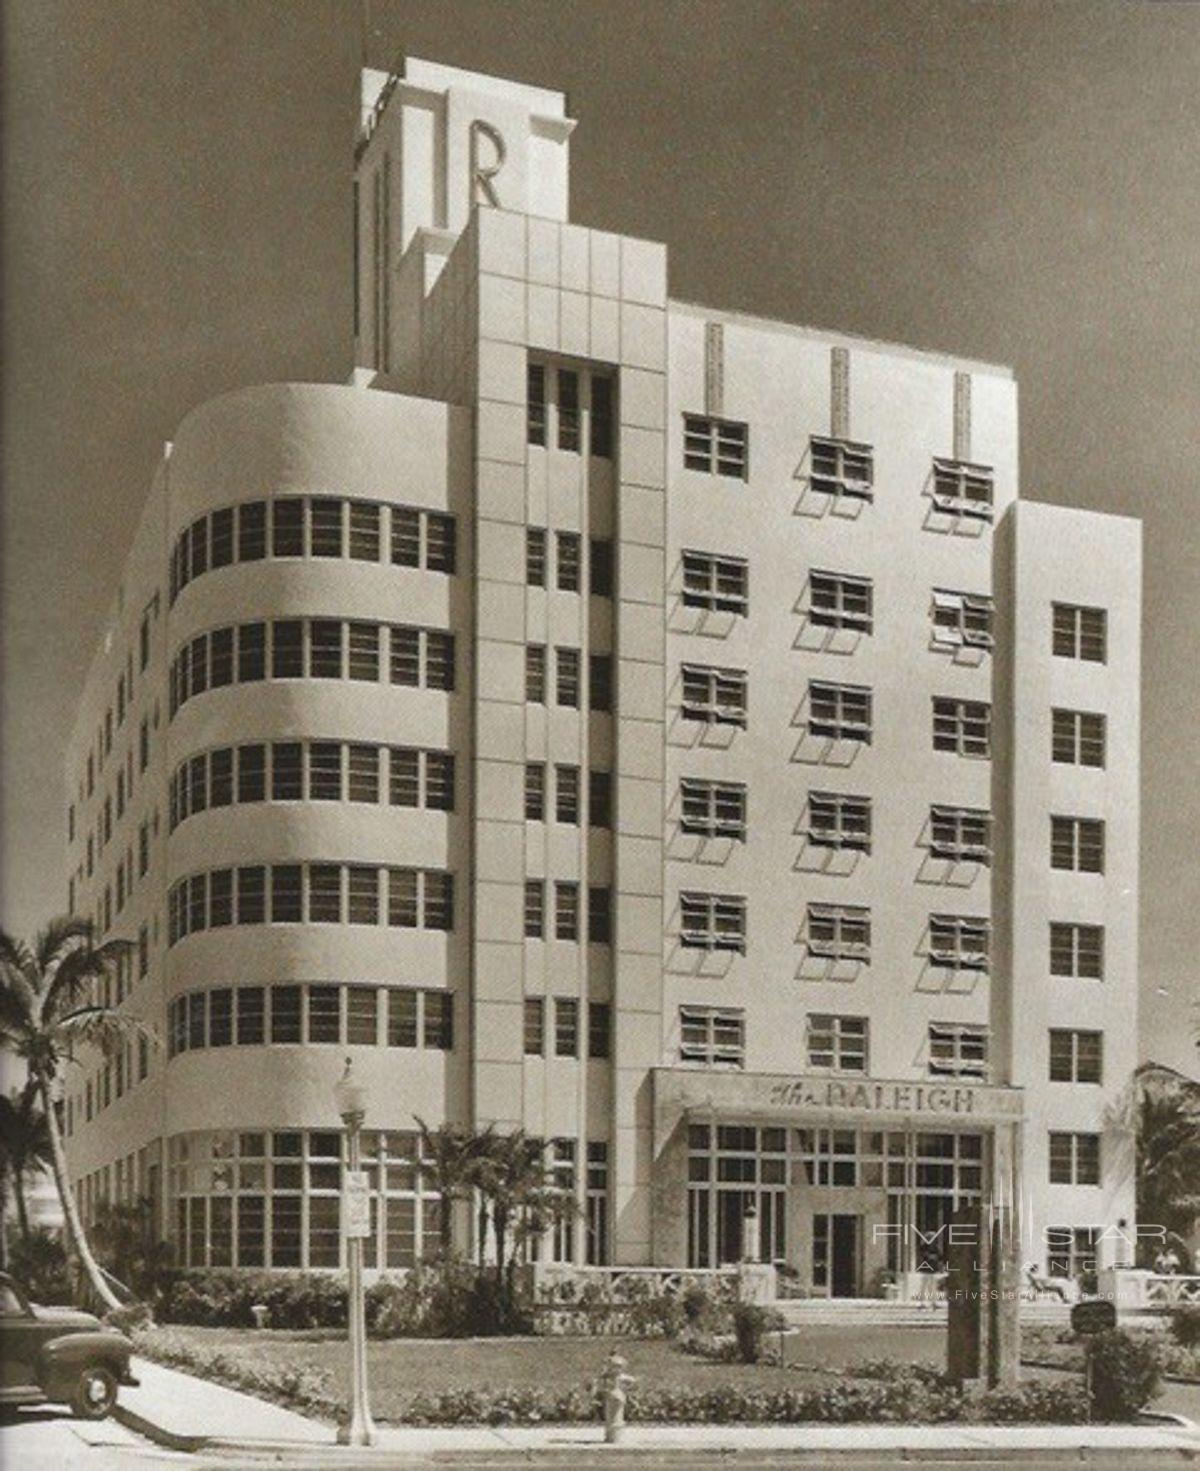 Historic Photo of the Raleigh Hotel